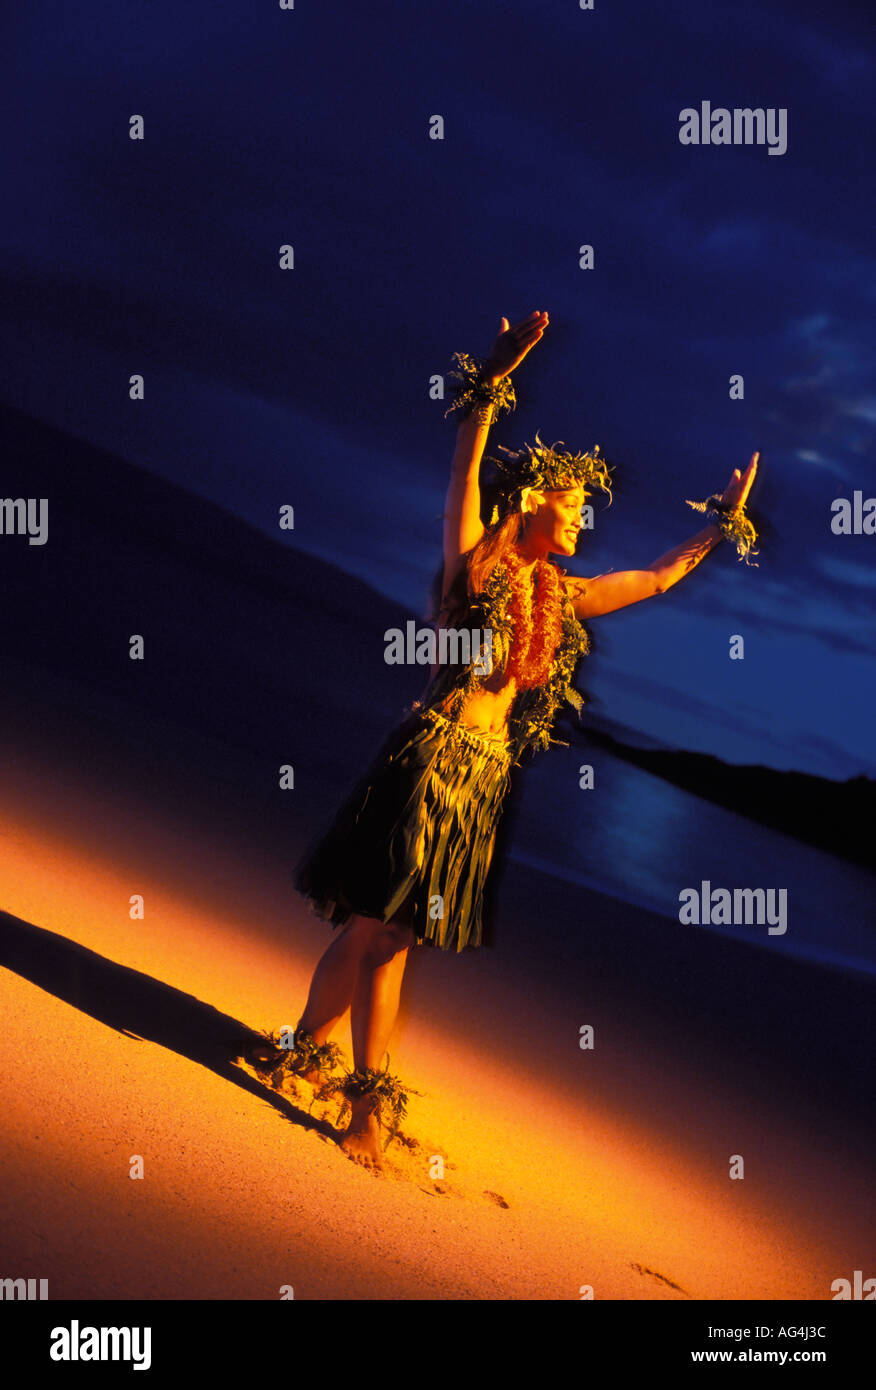 A hula dancer performs at night with a warm glow lighting her body The dancer is in the moon pose at Makena Maui Stock Photo